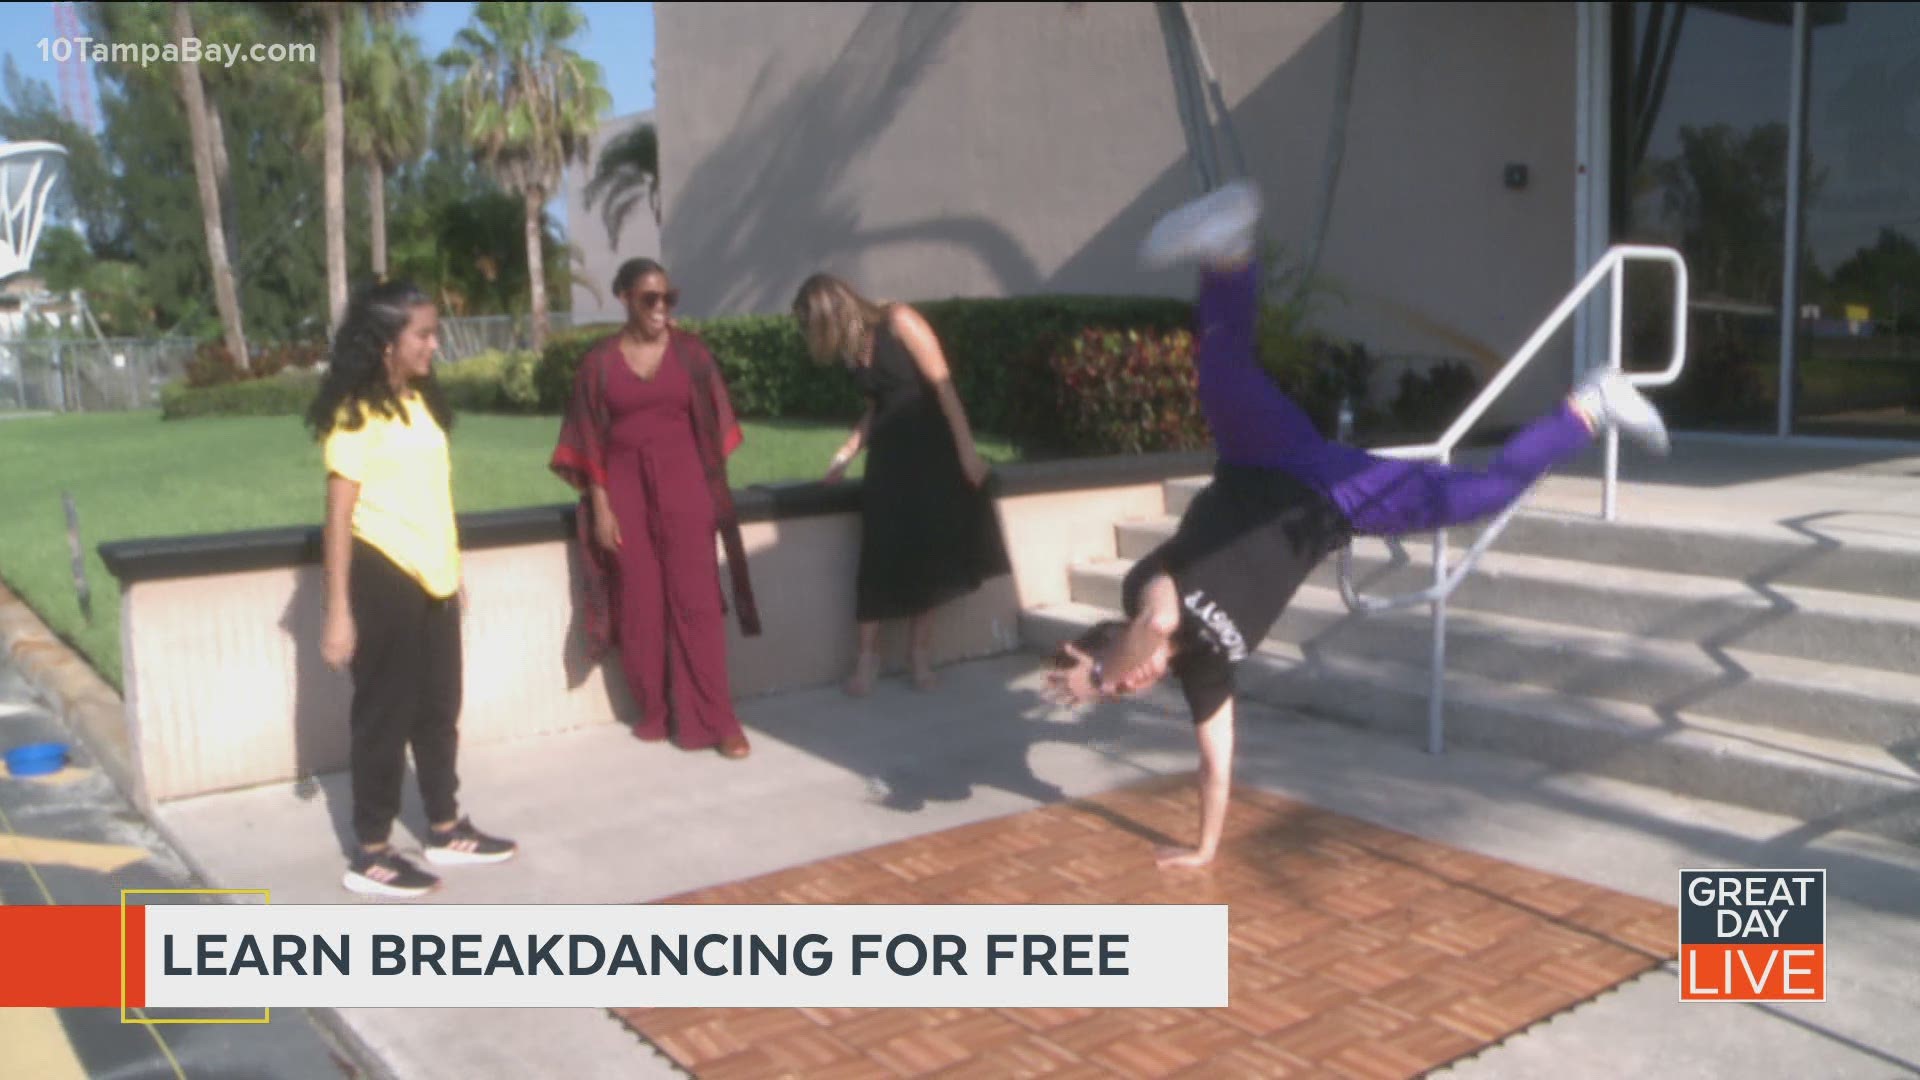 Learn to breakdance for free